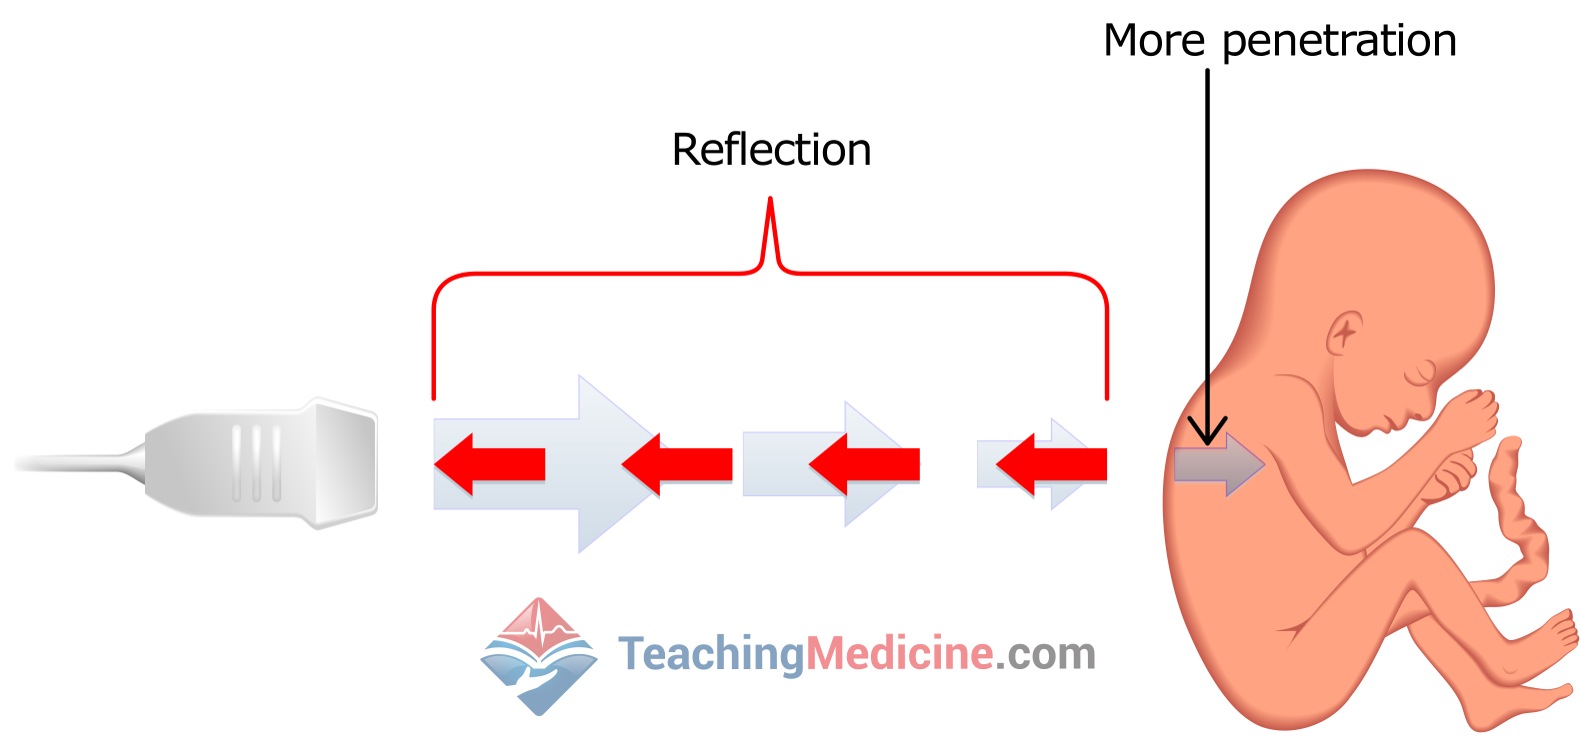 reflection bounces the signal back to the transducer